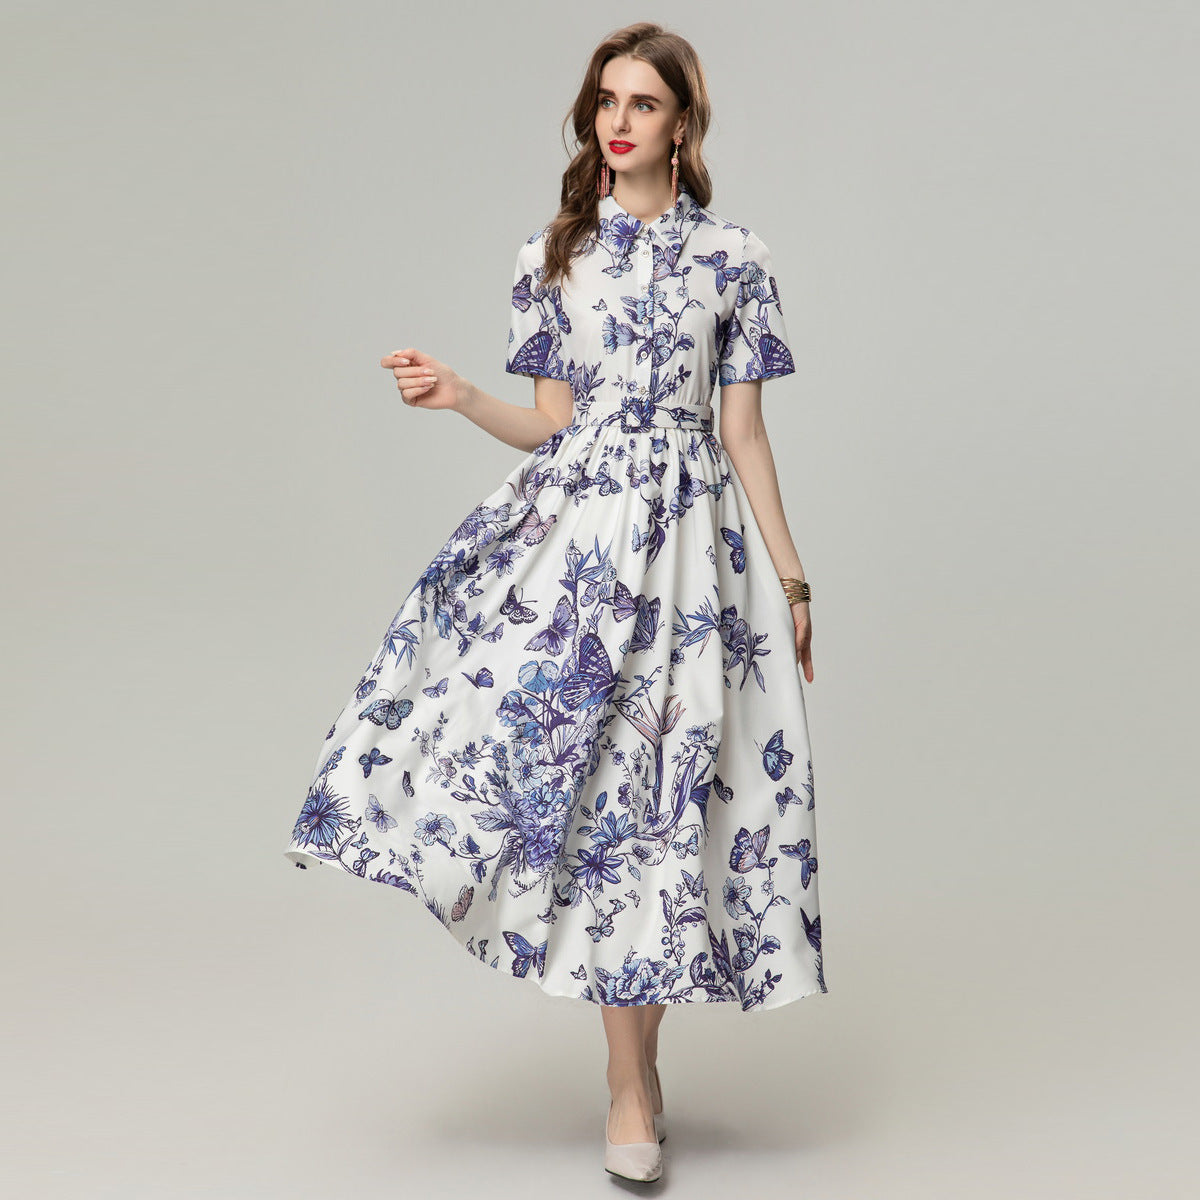 Elegant Short Sleeve Butterfly Print Dress - Four-Sided Elastic Waist for Comfort and Style